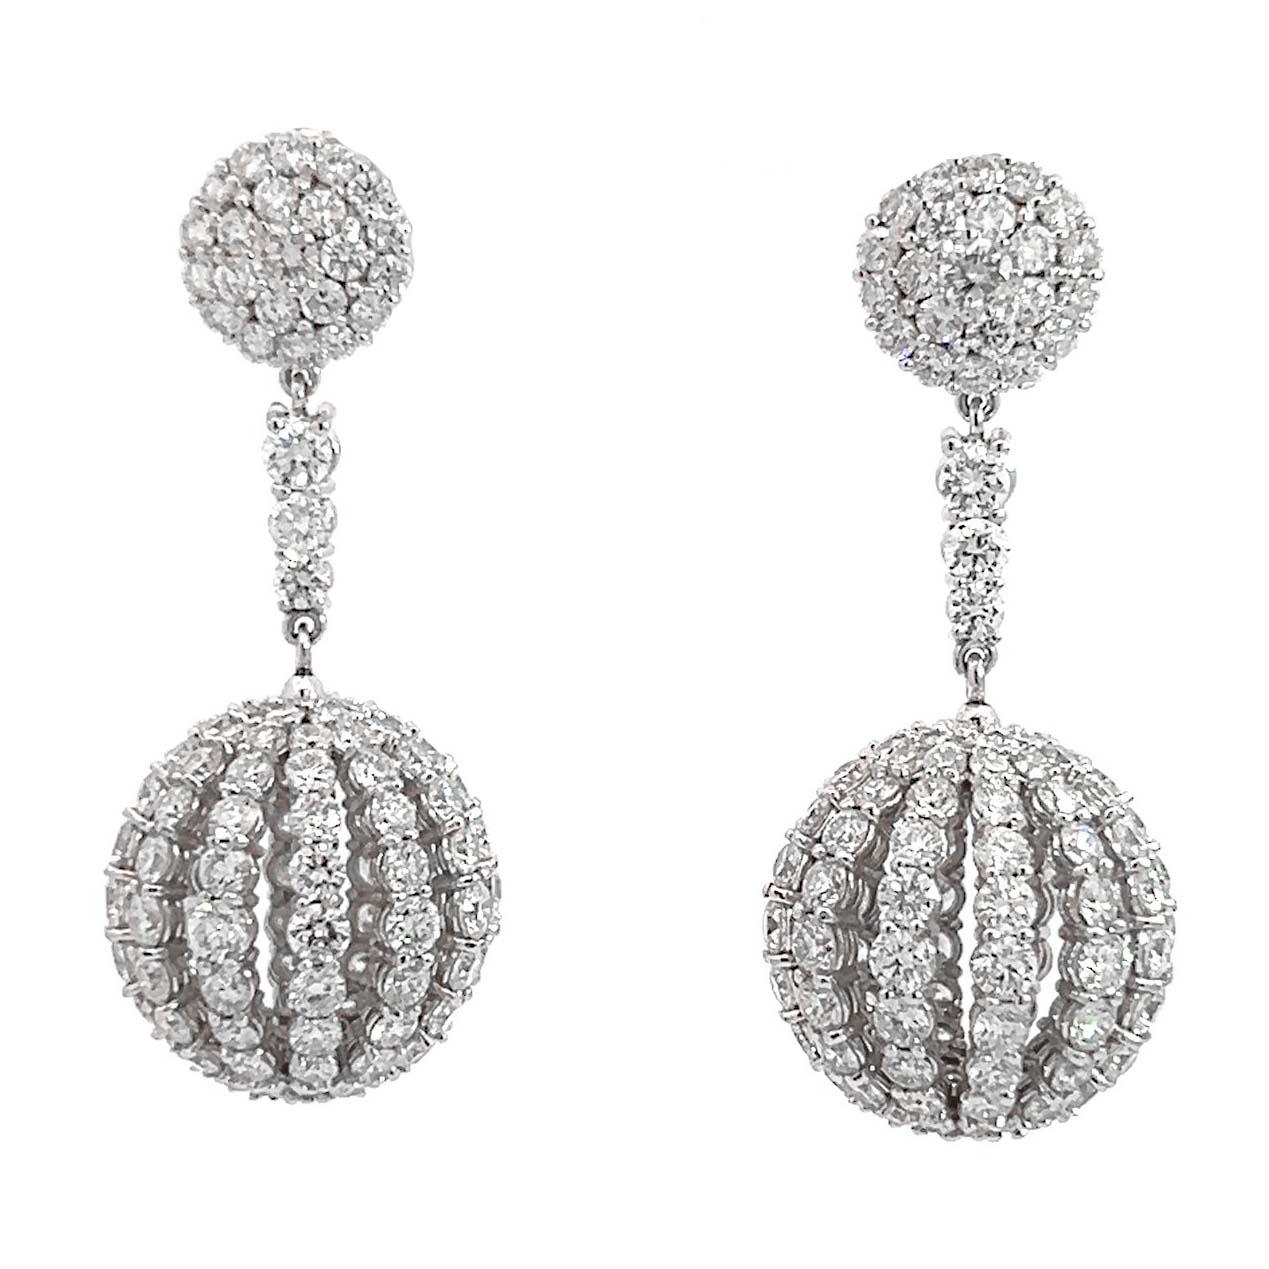 18-karat white gold diamond ball earrings. This exquisite pair of dangle earrings has 300 round brilliant-cut white diamonds, totaling 13 carats. 
Crafted with meticulous attention to detail, each earring features a paved diamond with three round